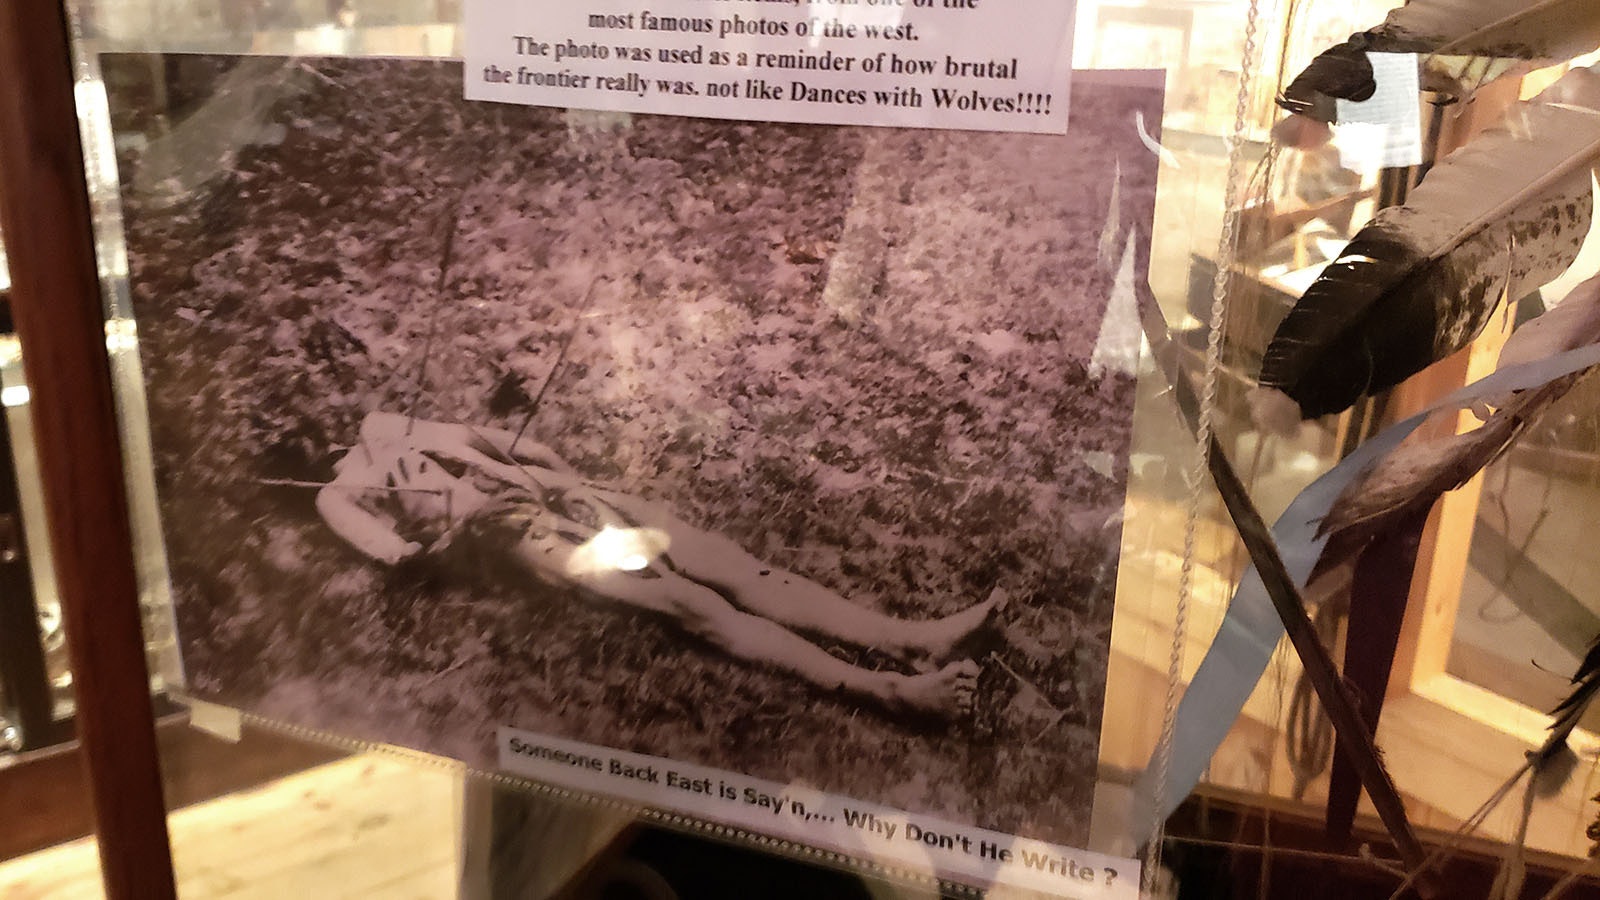 The arrow behind the photo is believed to have come from the body shown in the picture.